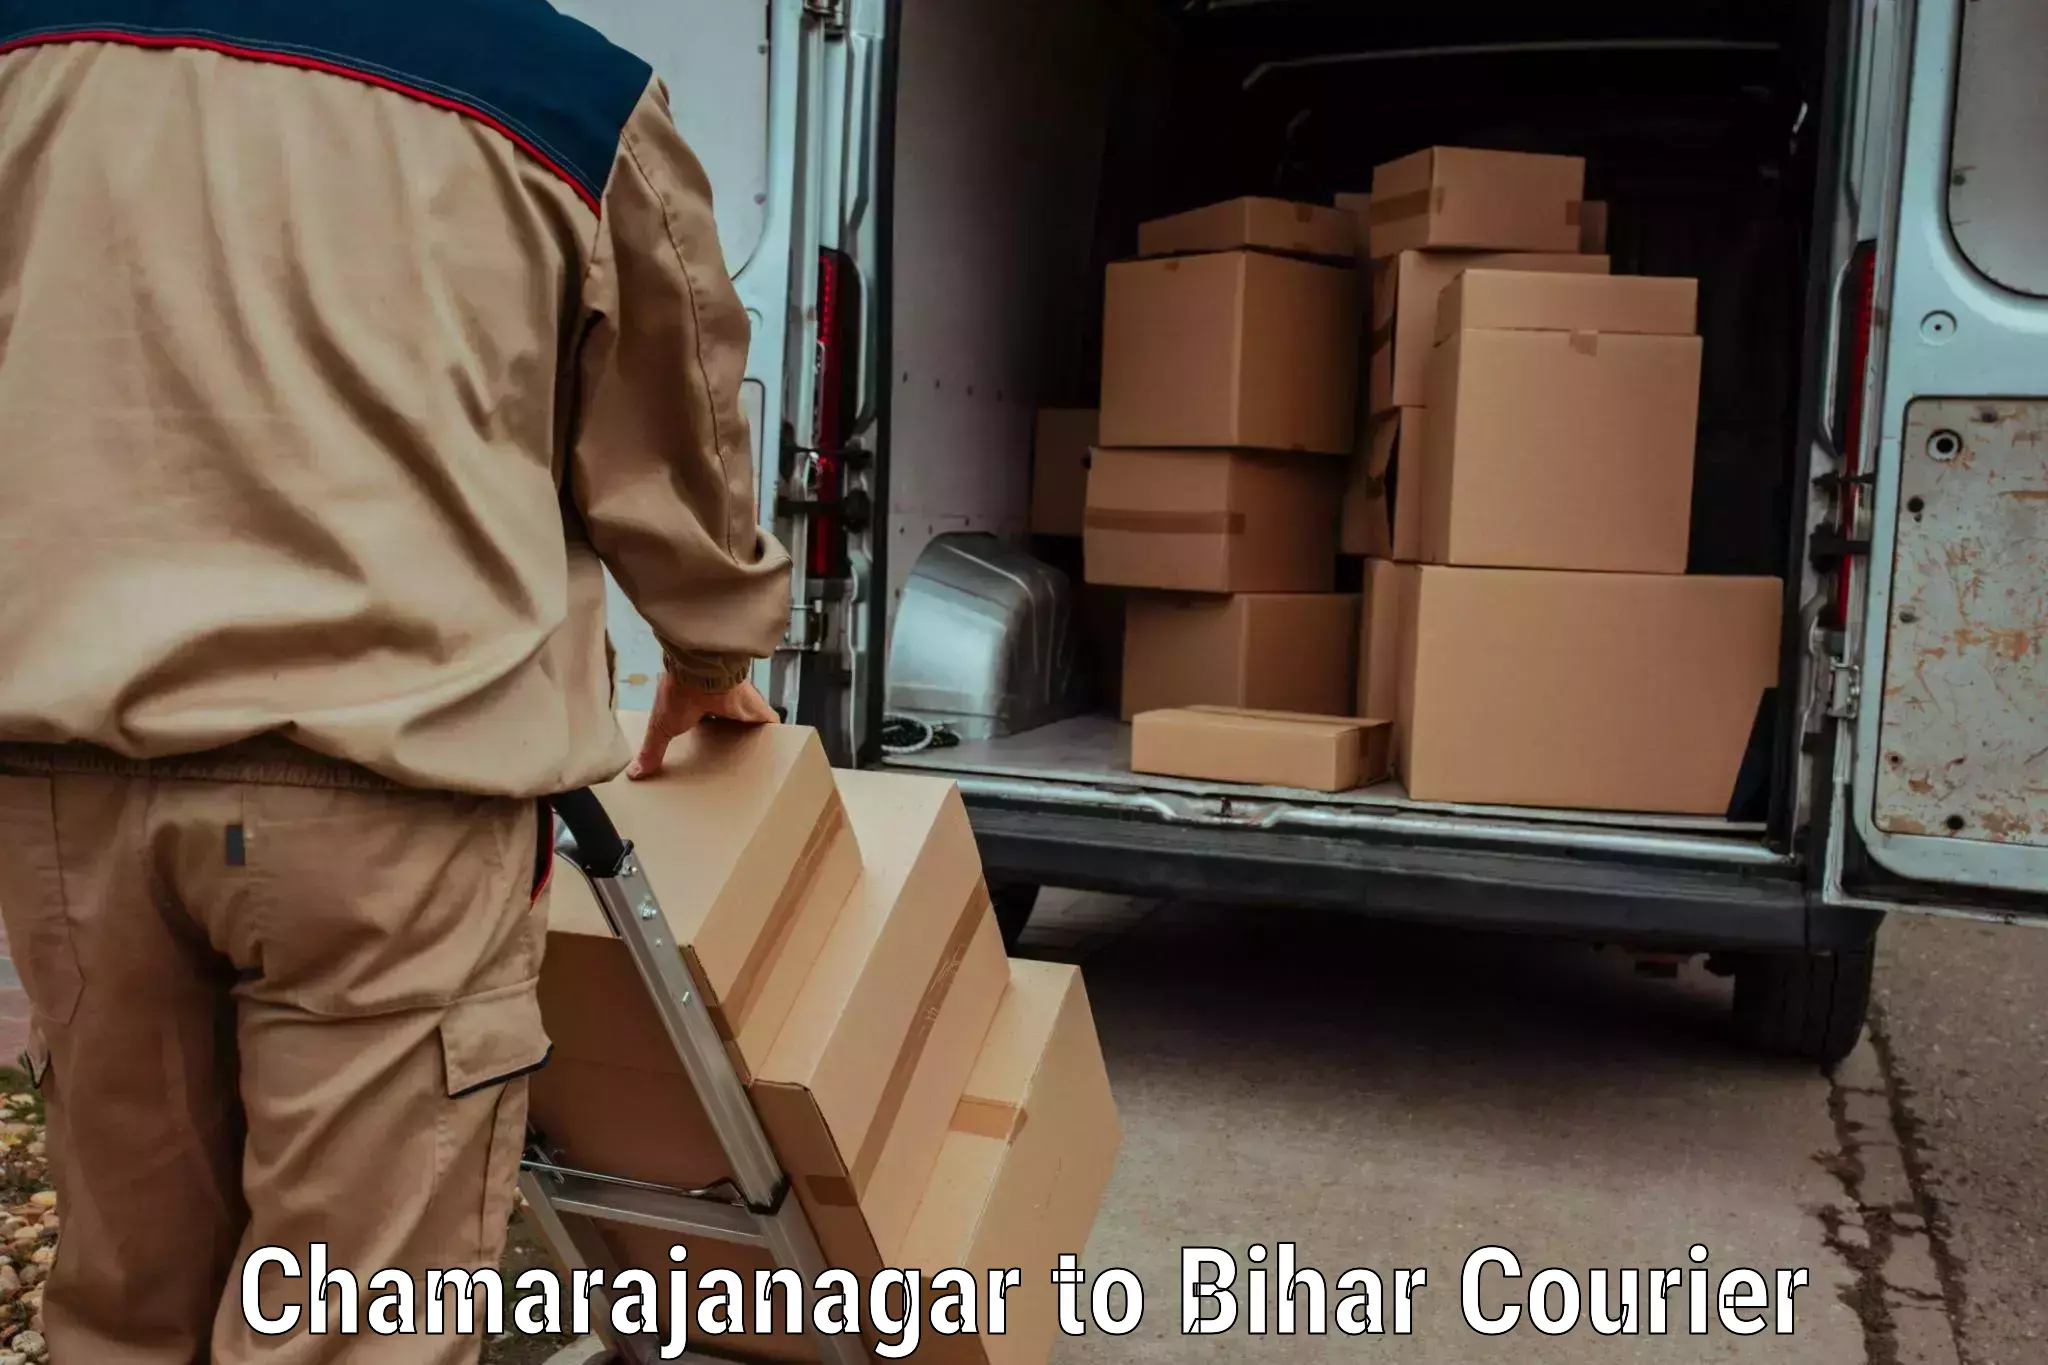 Customizable delivery plans Chamarajanagar to Buxar